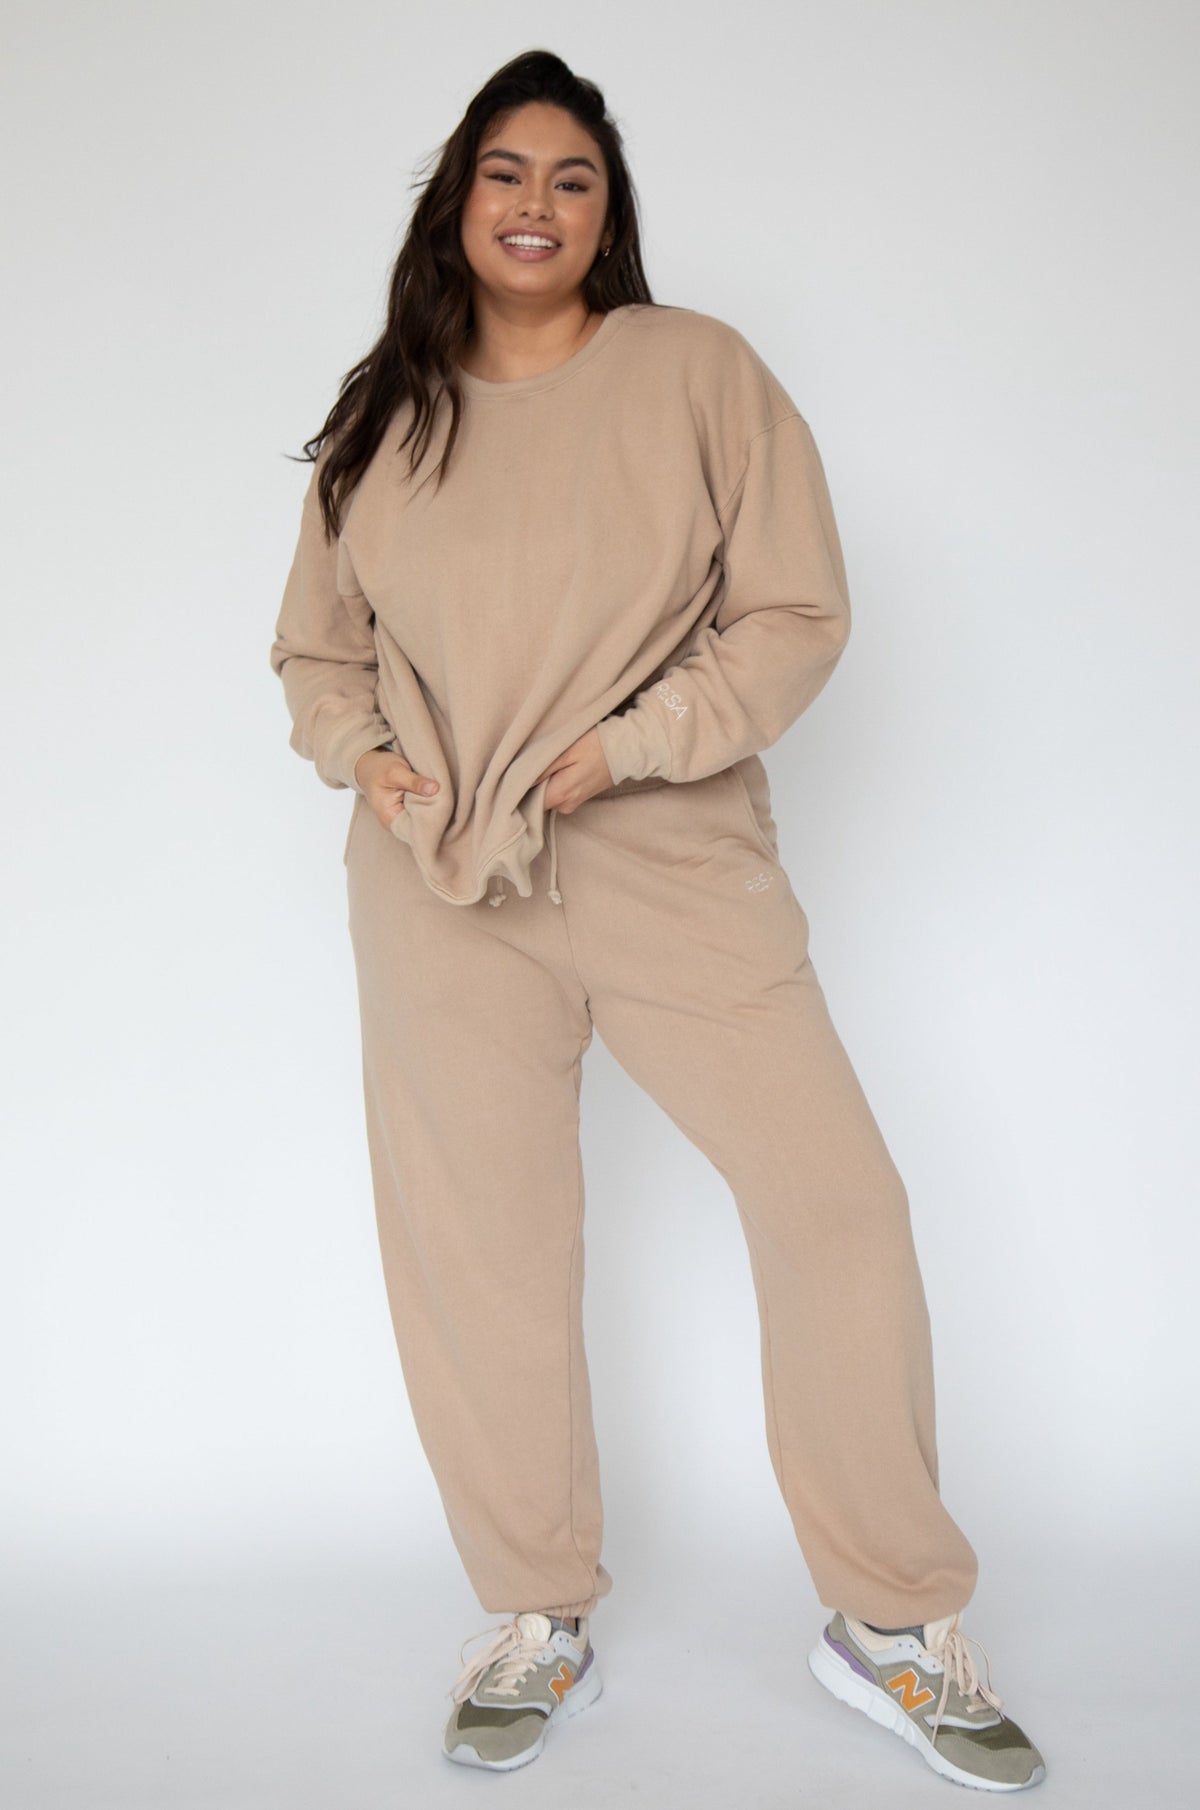 This is an image of Bodhi Sweat pants in Sand - RESA featuring a model wearing the dress